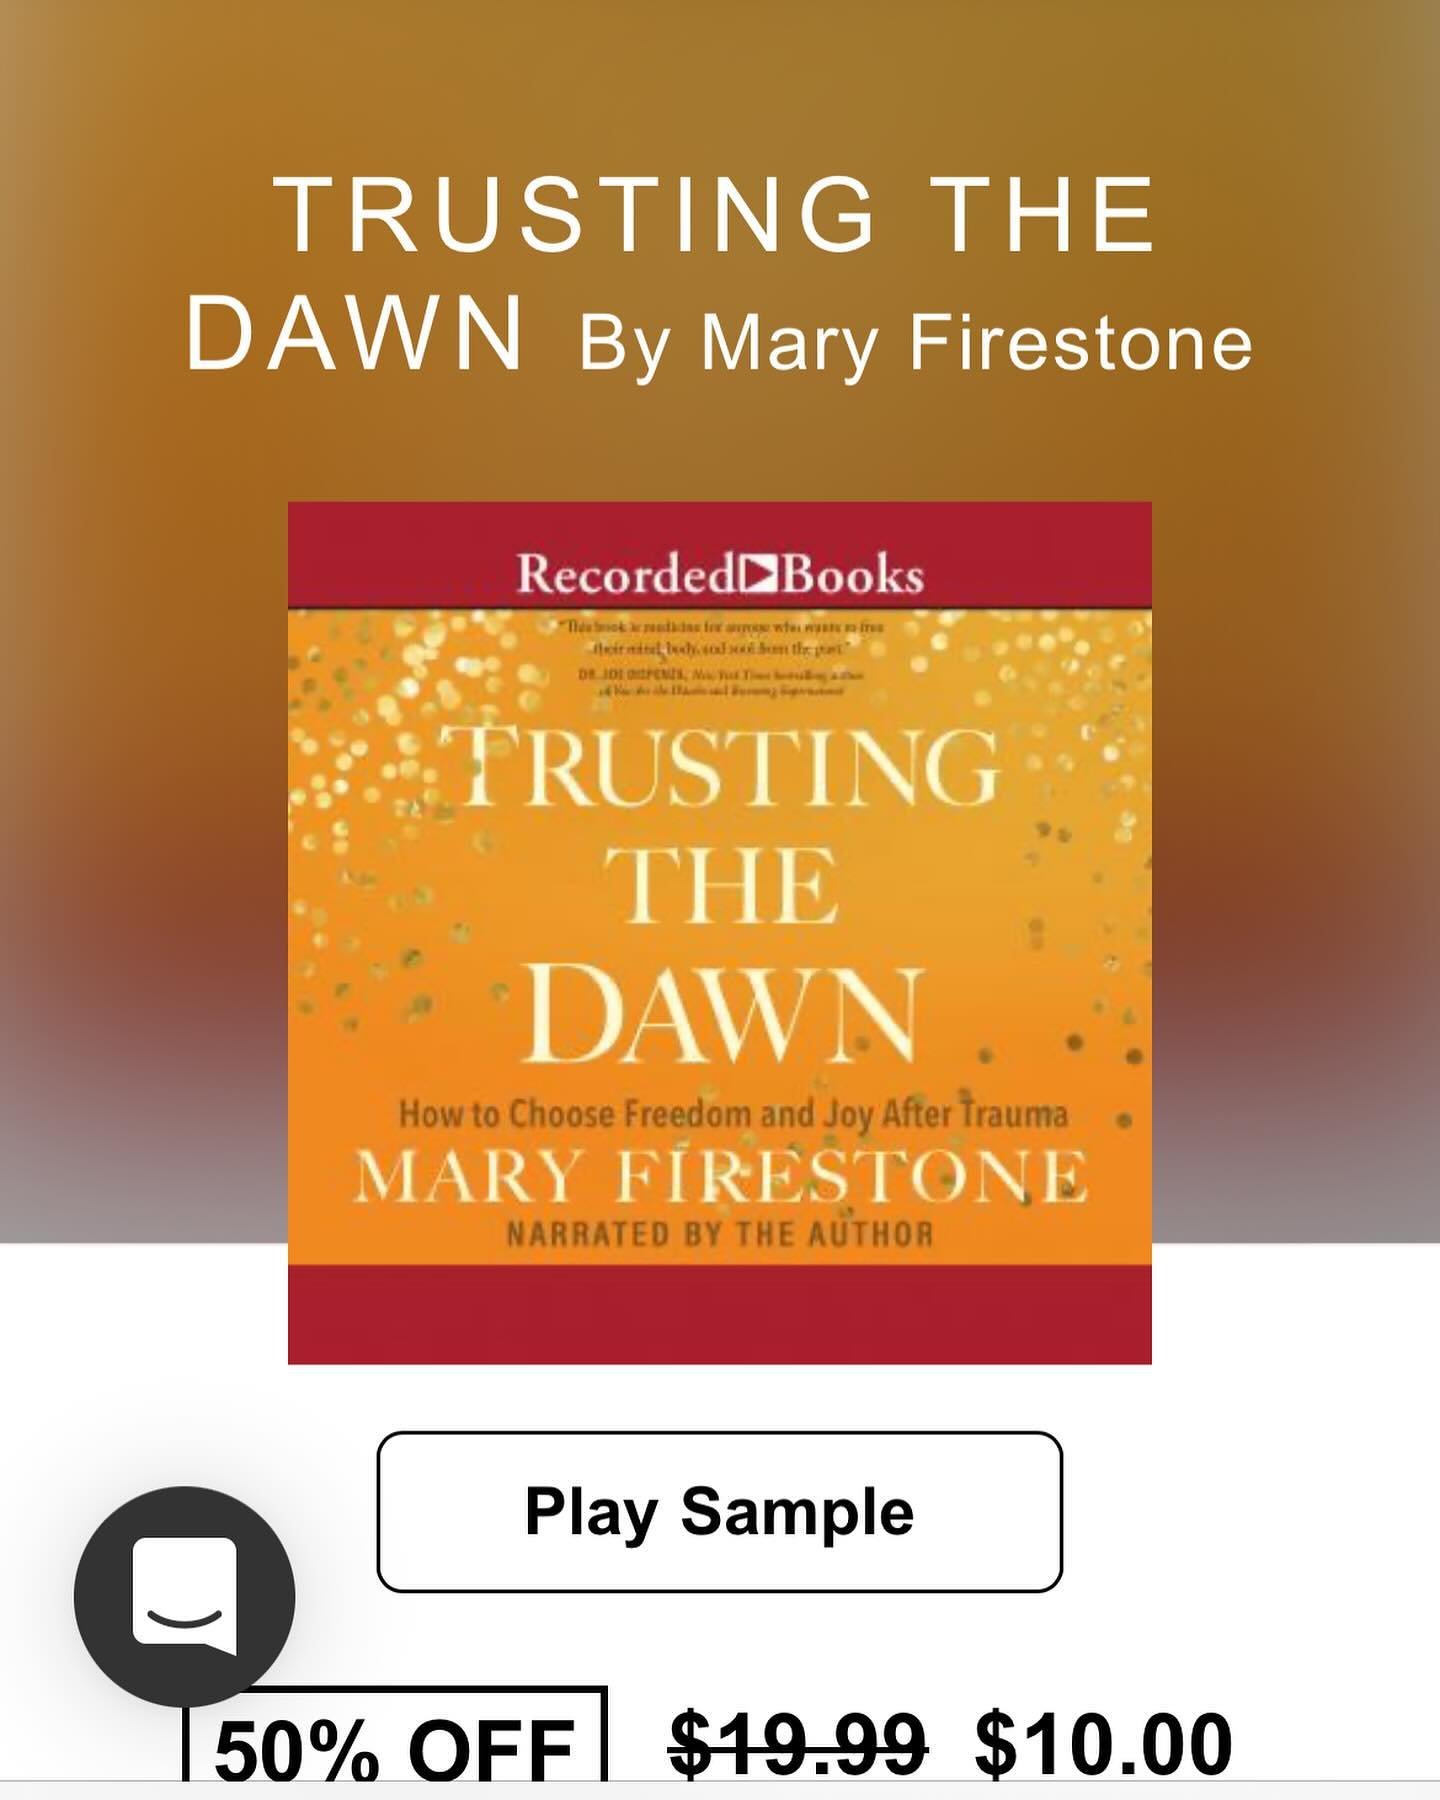 My audiobook version of Trusting the Dawn is on sale through the month @audiobooks_com. We all experience trauma and loss- listen and learn how to work with it, heal and find freedom! Xoxo #selfhelp #posttraumaticgrowth #trauma #traumahealing #freedo